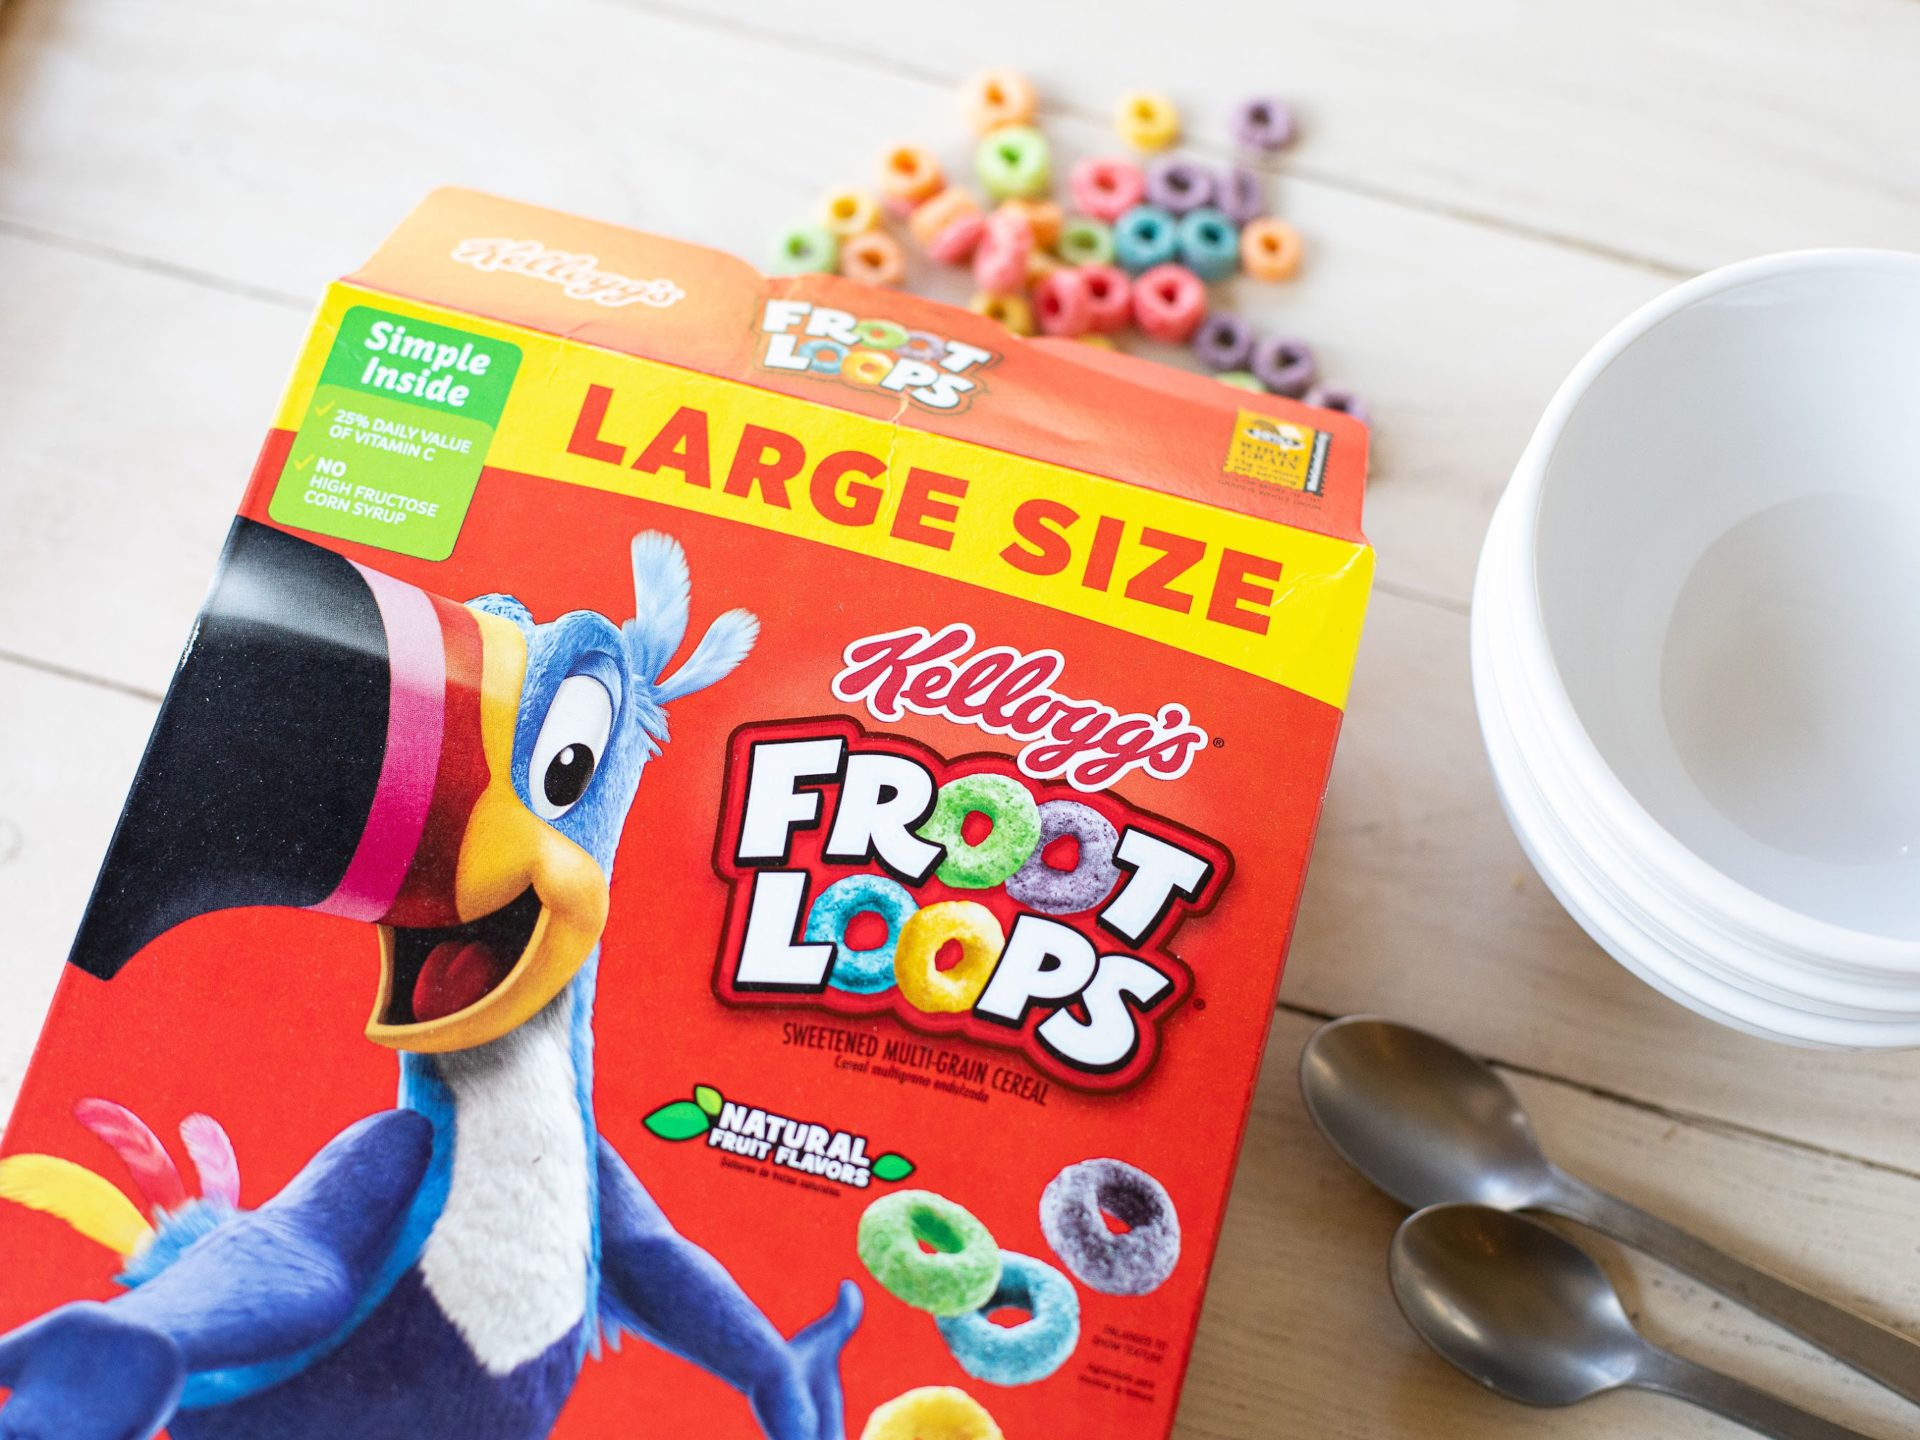 Large Size Boxes Of Kellogg’s Cereal As Low As $1.34 At Kroger